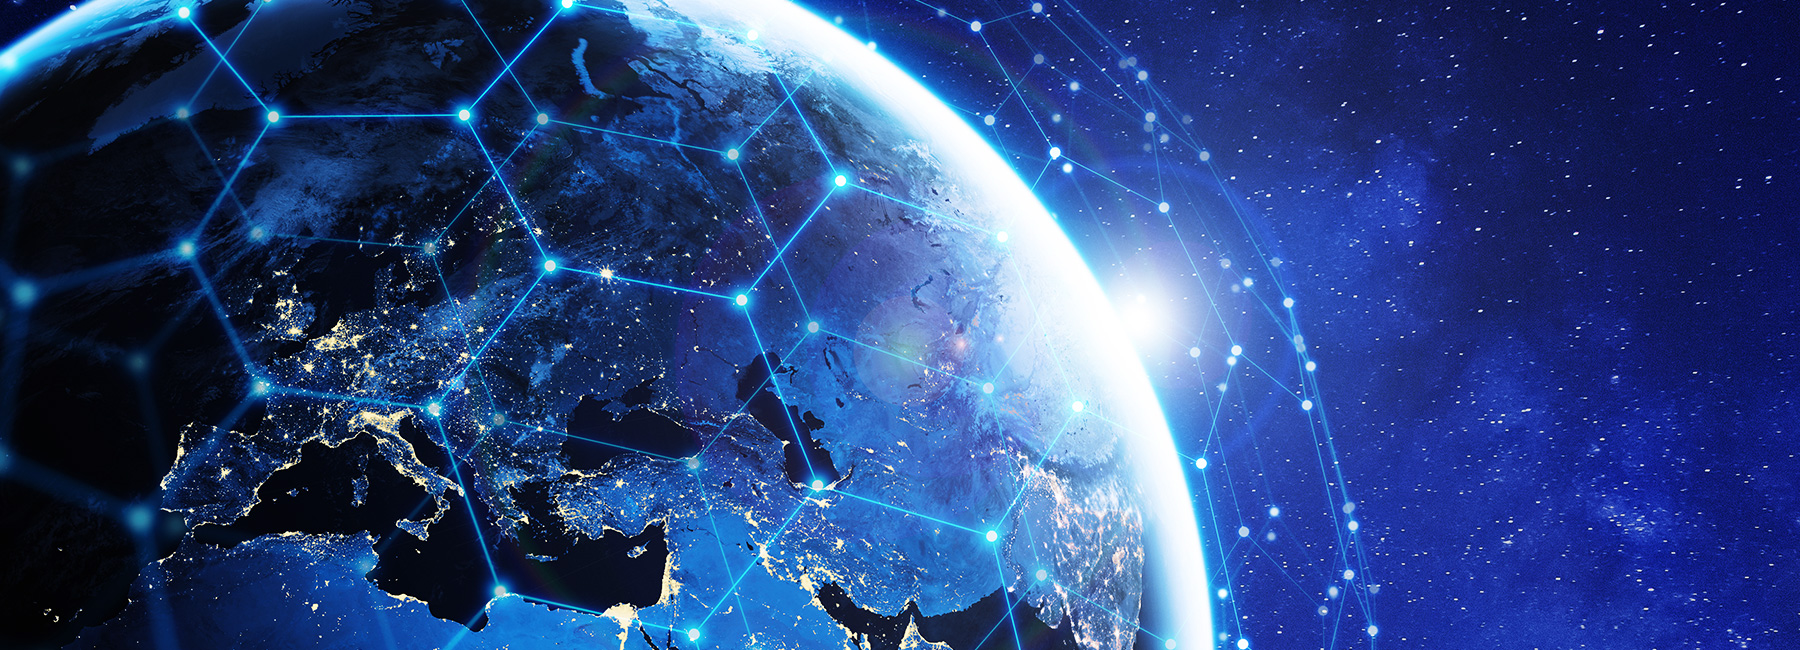 Cybersecurity in Orbit: The Growing Vulnerability of Space-based Systems